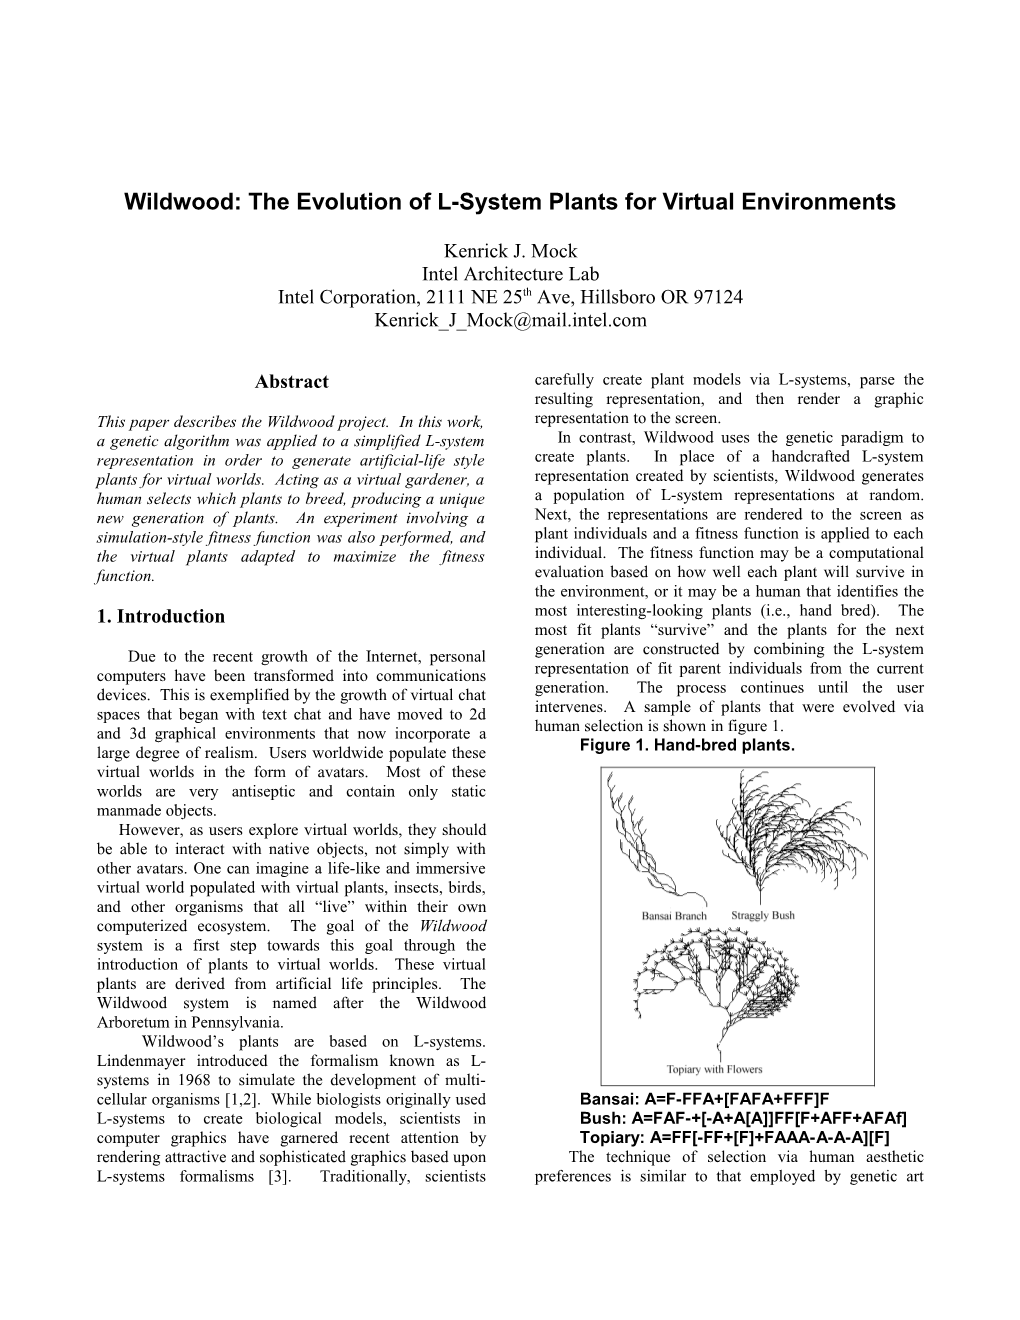 Wildwood: the Evolution of L-System Plants for Virtual Environments